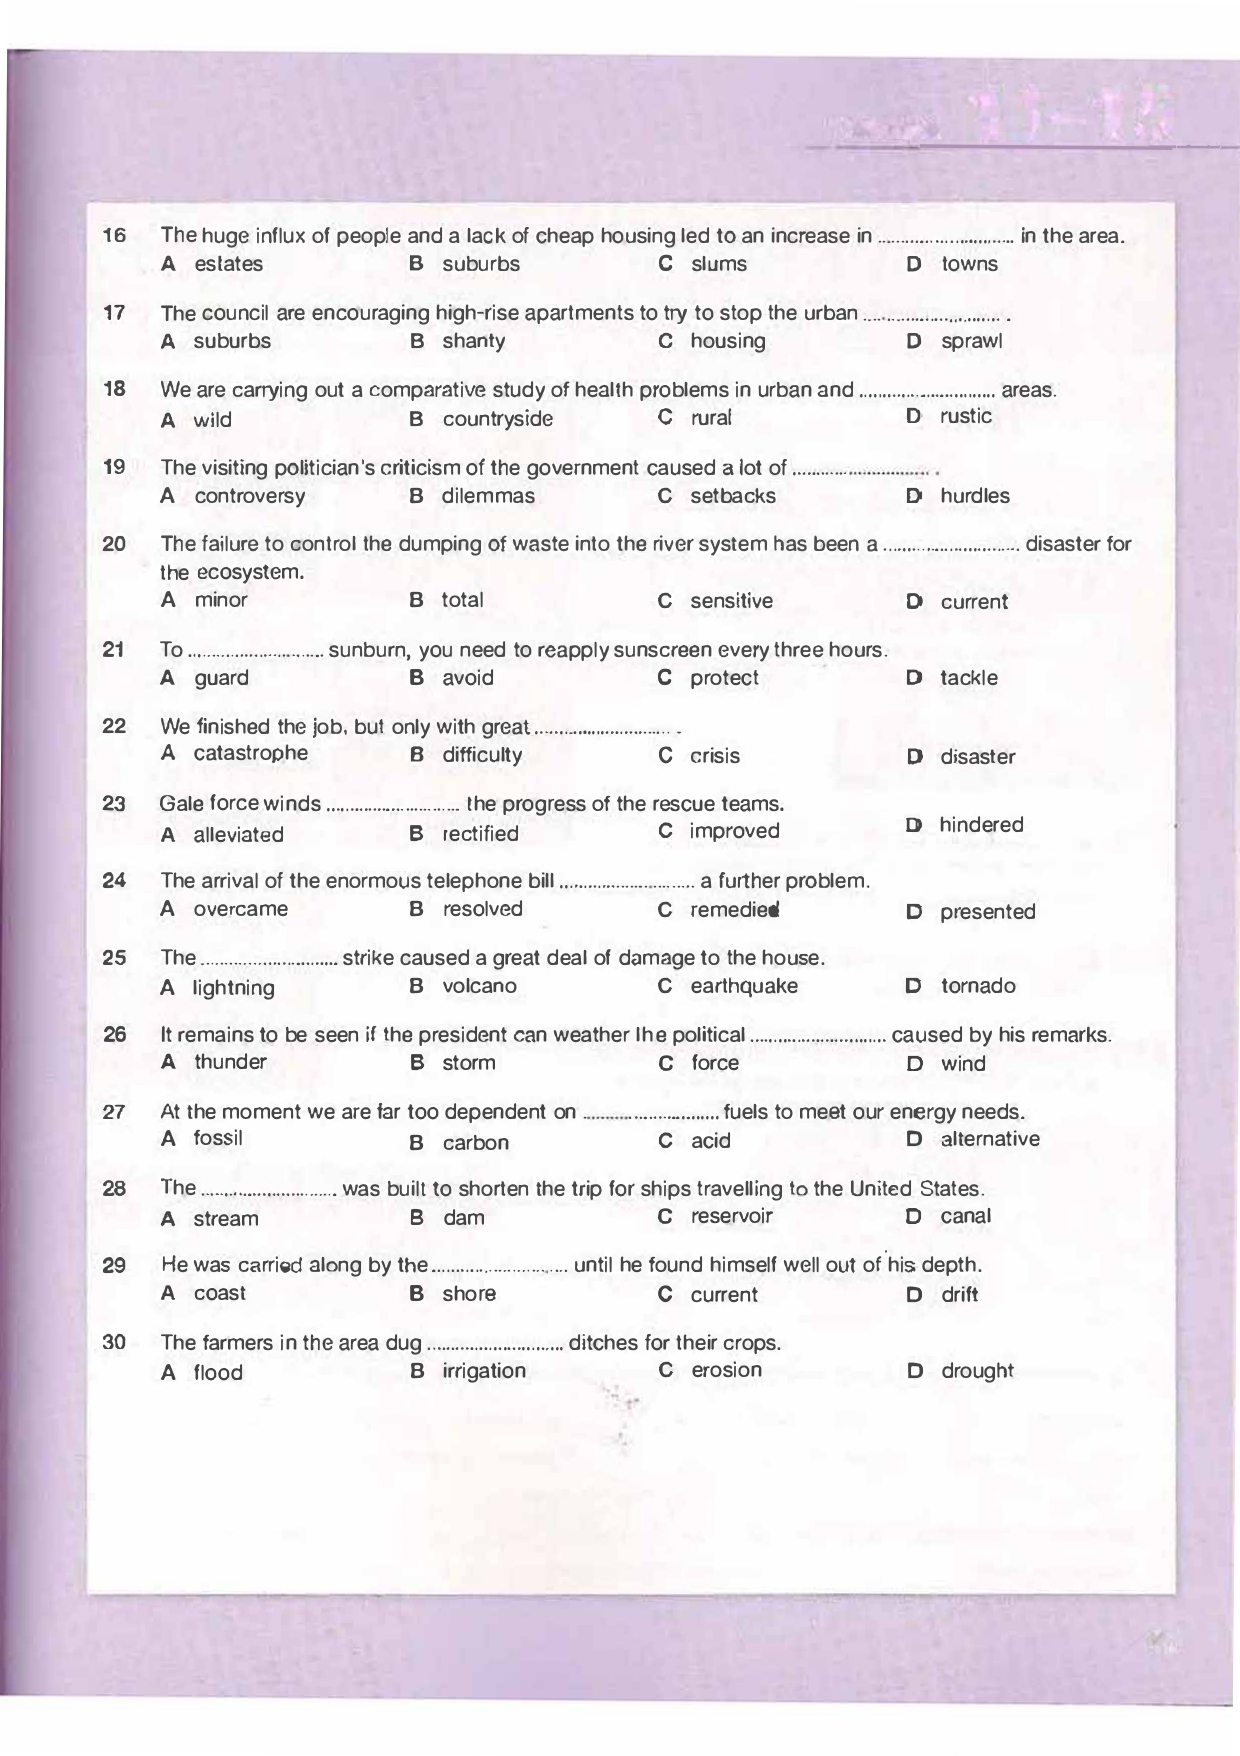 [tailieudieuky.com] Vocabulary tests for gifted students with key (13 pages)_page-0006